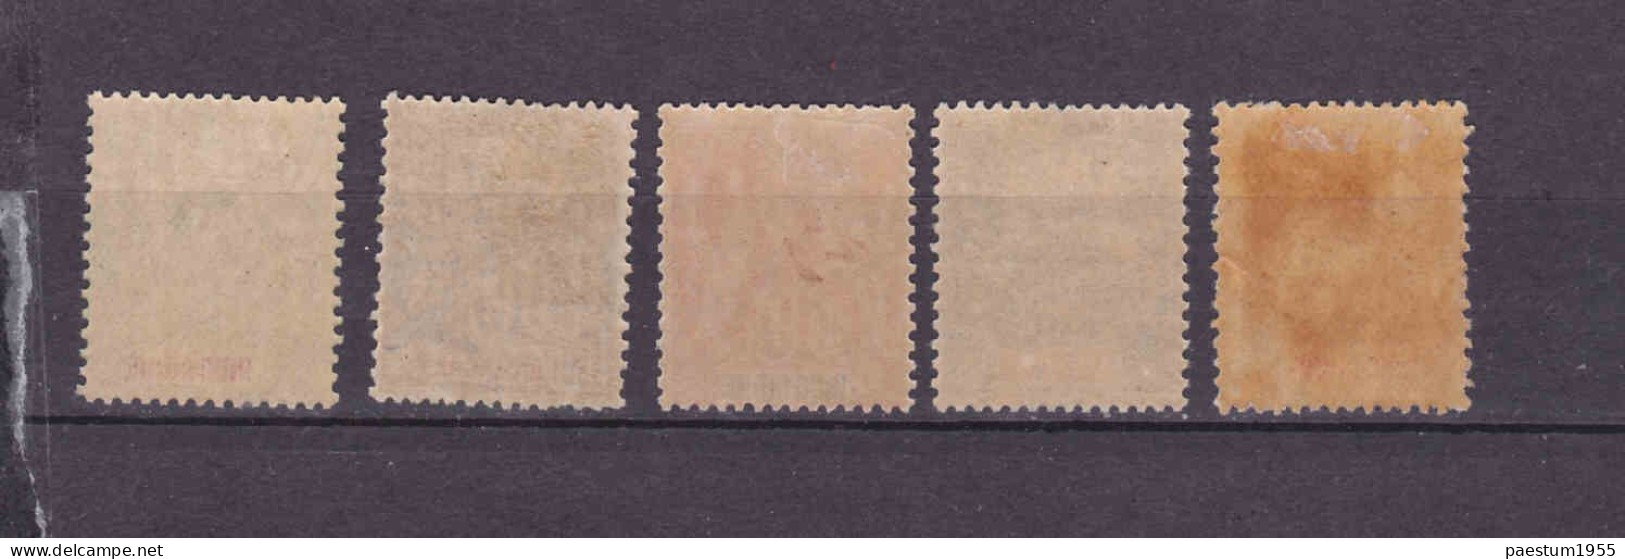 INDOCHINE - Lot Complet 5 Timbres Neuf* 1901 Type Groupe FR-IC 17 FR-IC 18 FR-IC 19 FR-IC 20 FR-IC 21 - Unused Stamps